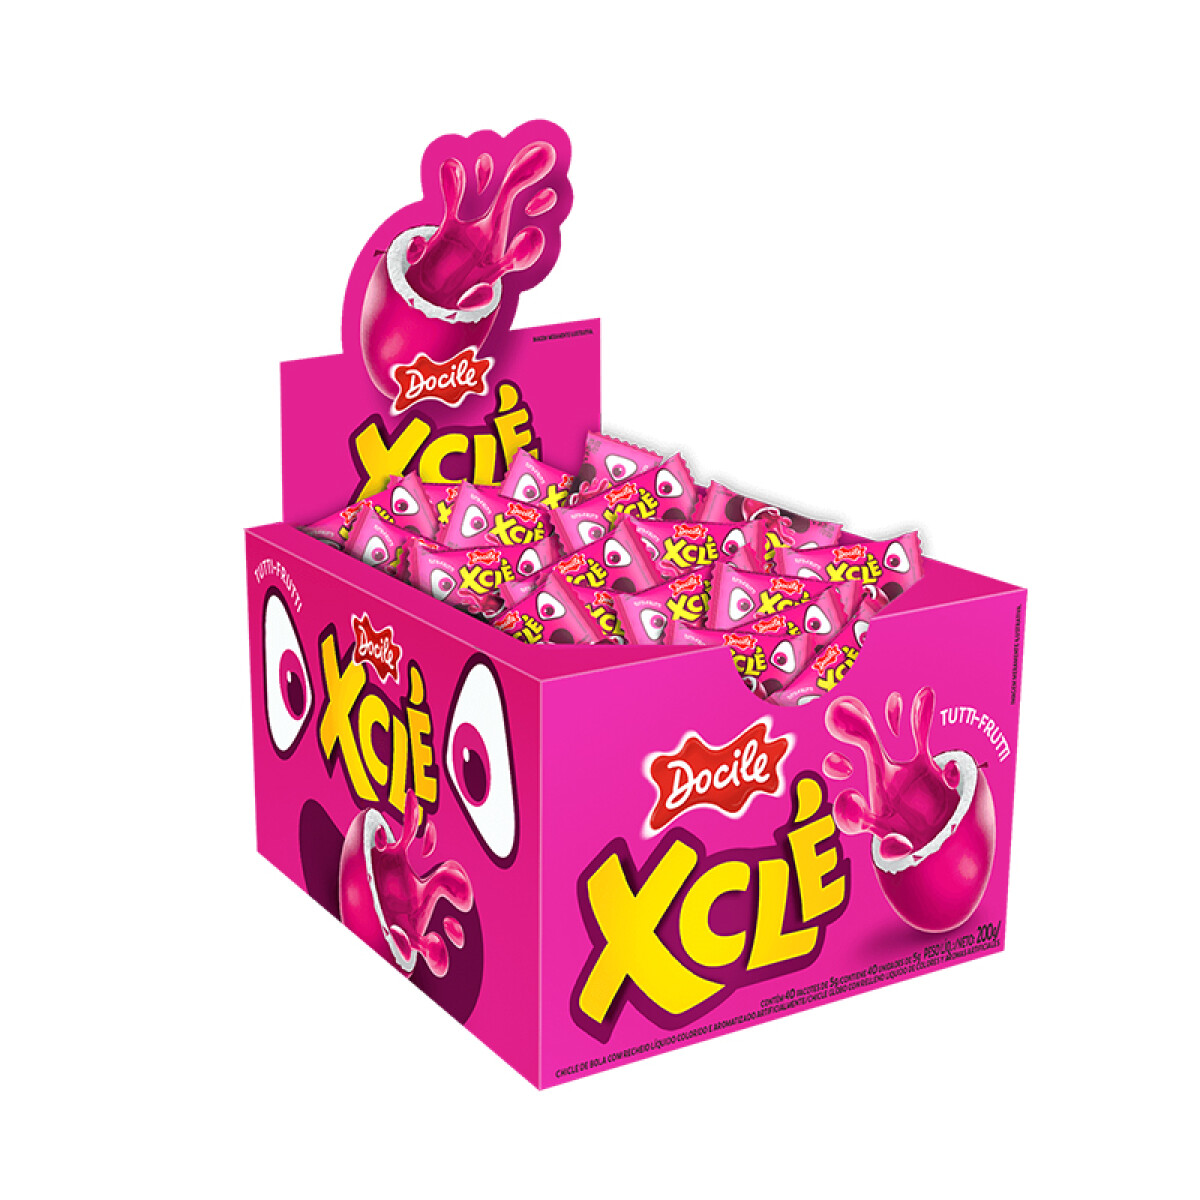 Chicle DOCILE XCLE x40 unidades 200grs - Tutti Frutti 